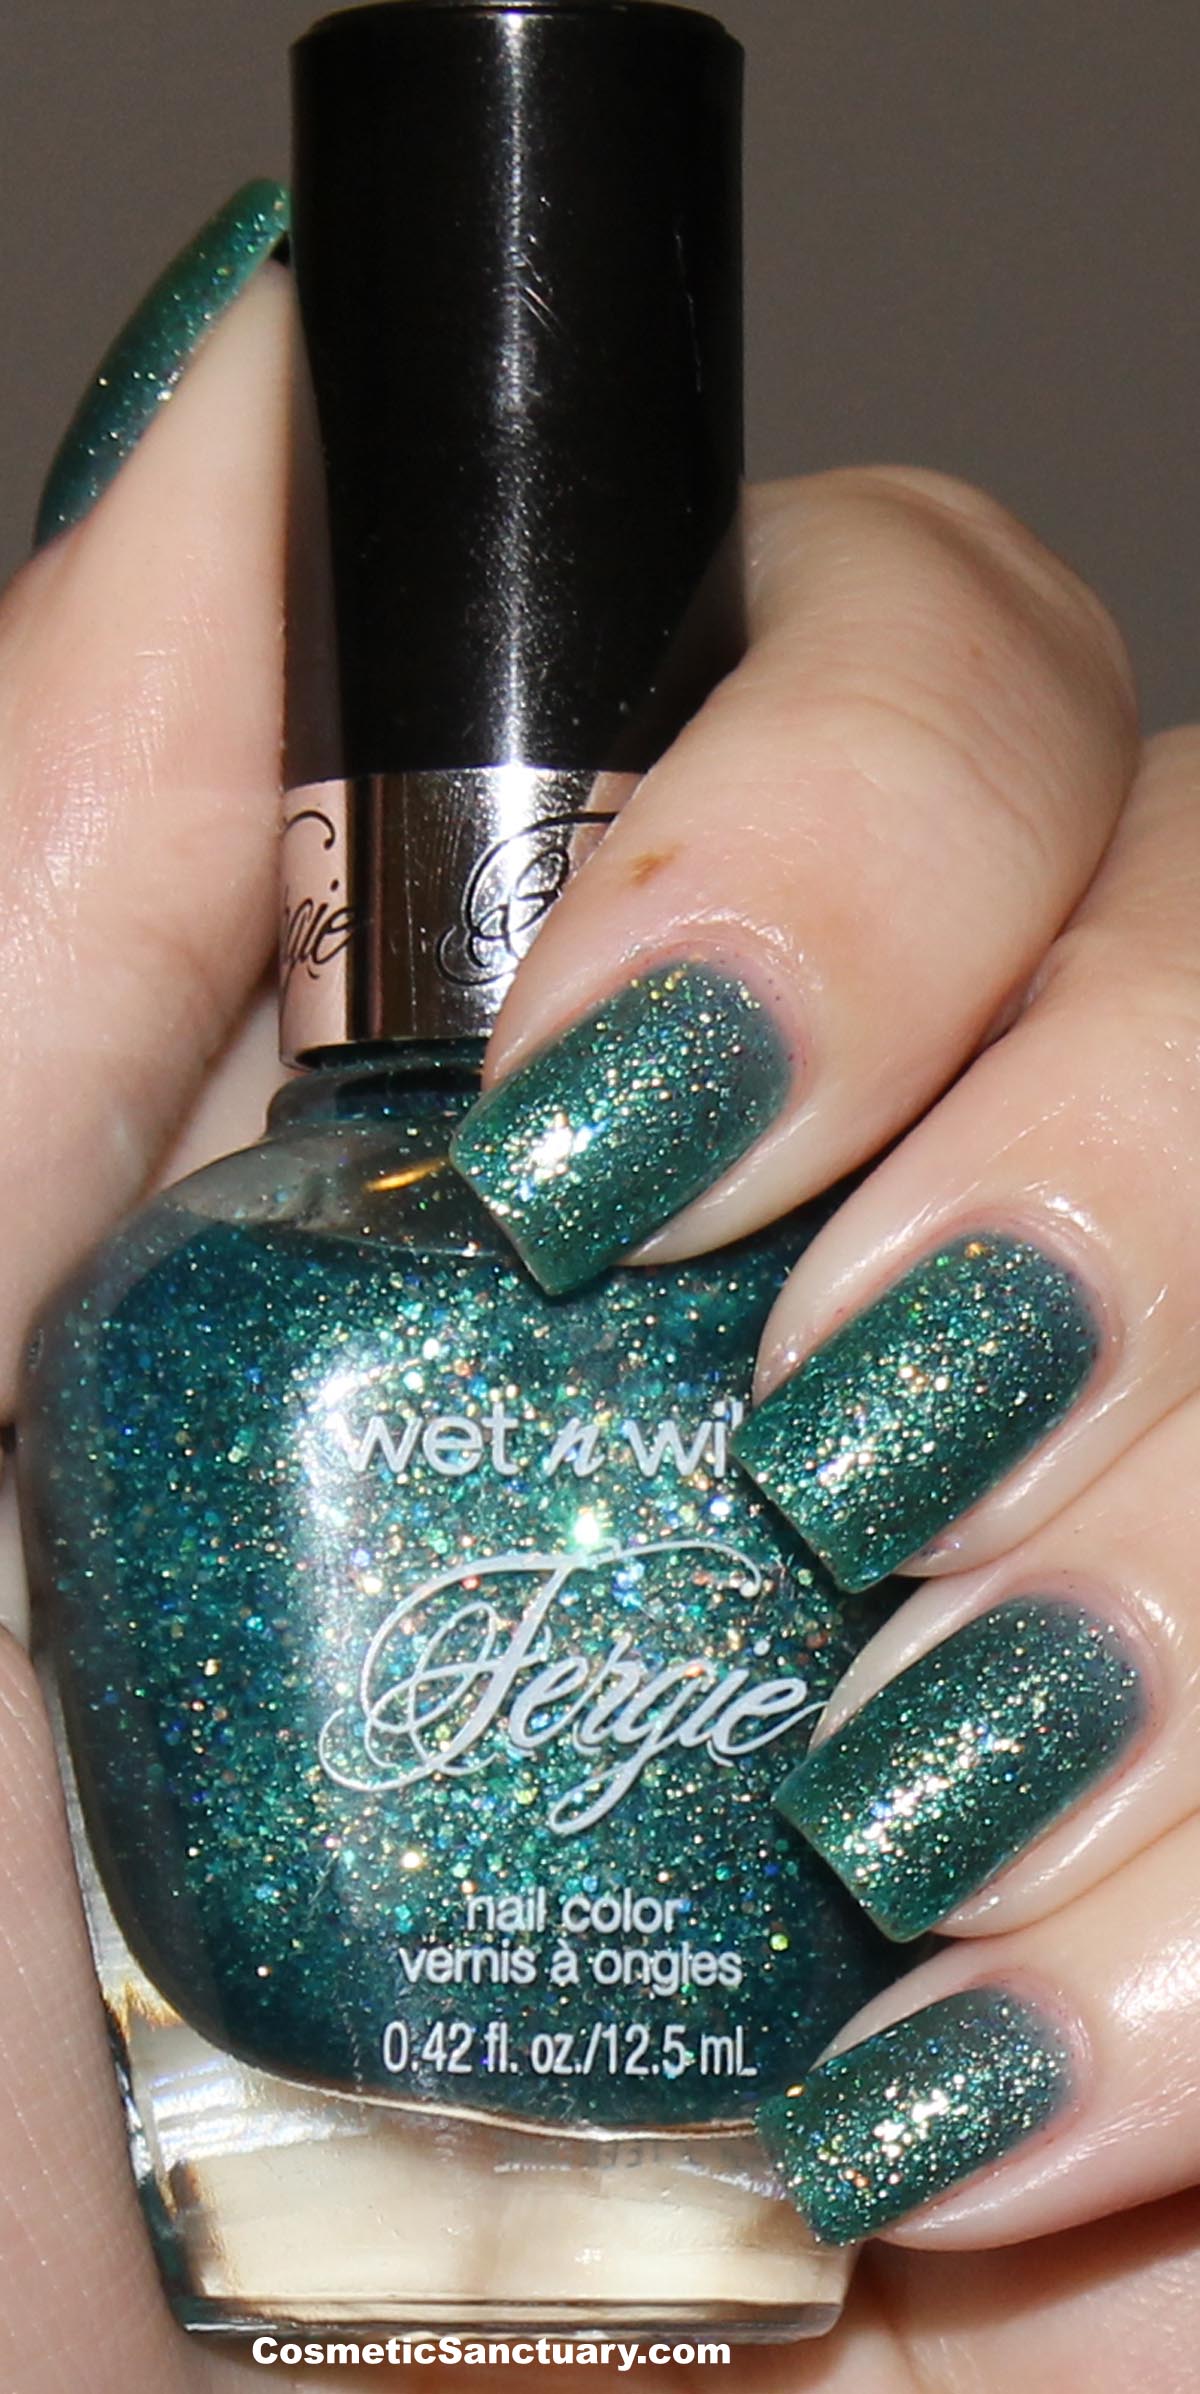 Wet n Wild Fergie Nail Polish Swatches and Review